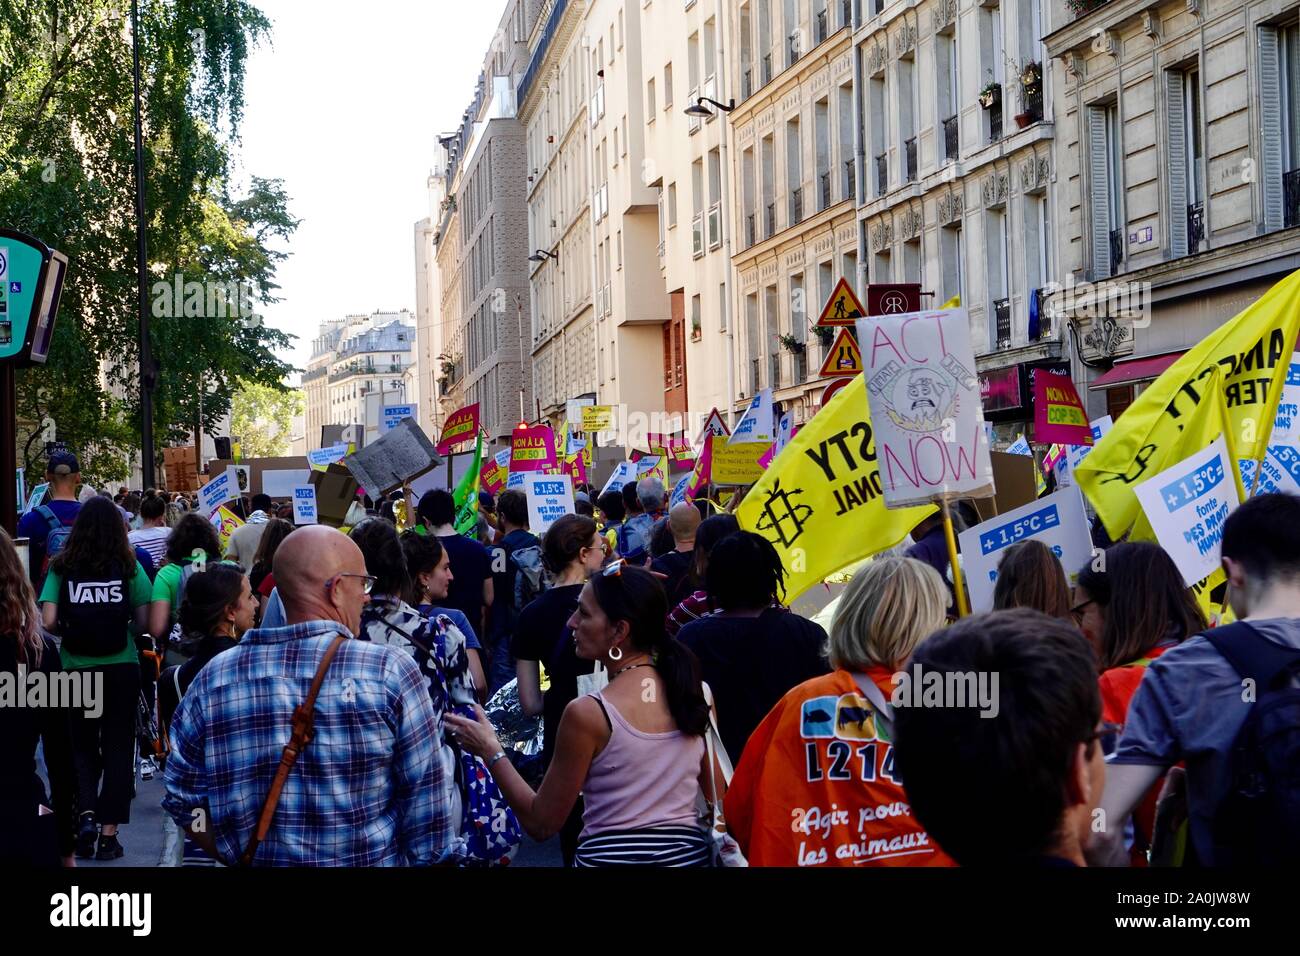 Paris, France. 20 September 2019. Global Climate Week demonstration taking place today in the 12th Arrondissement of Paris, with students, union members, and other worried citizens coming together to express their concern for the planet and the need to take seriously the climate emergency. Stock Photo